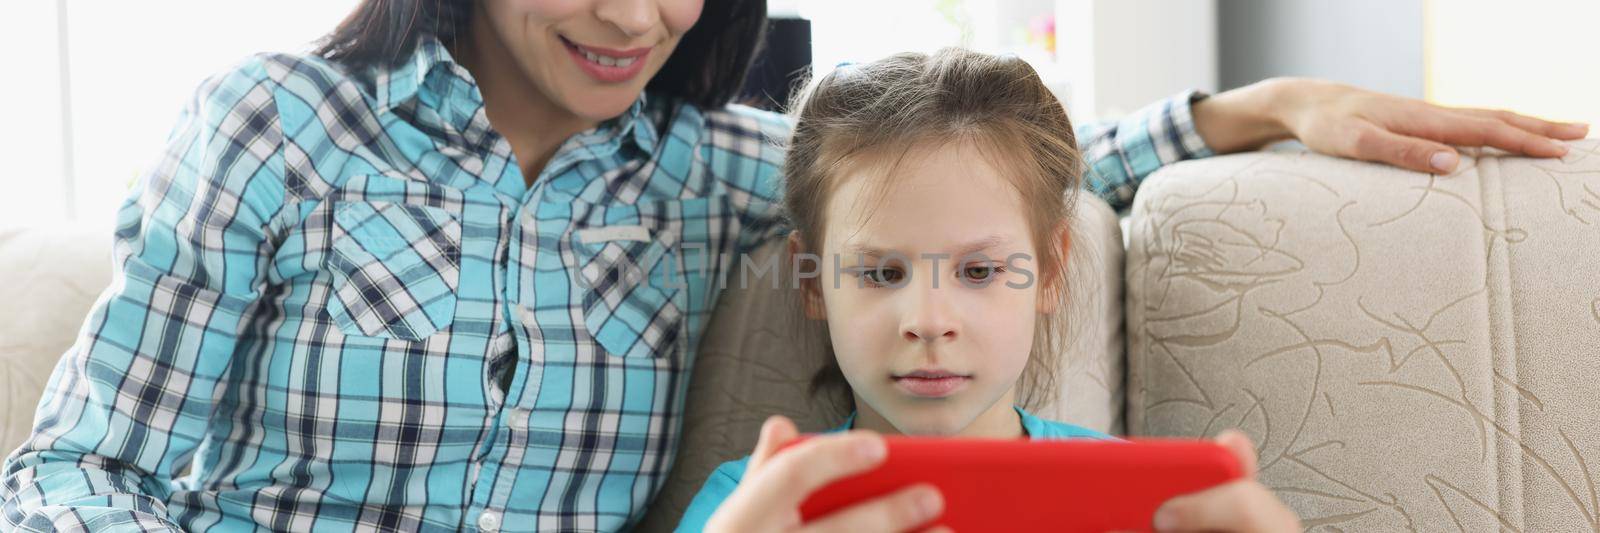 Daughter play online video games on smartphone and mum watch it by kuprevich